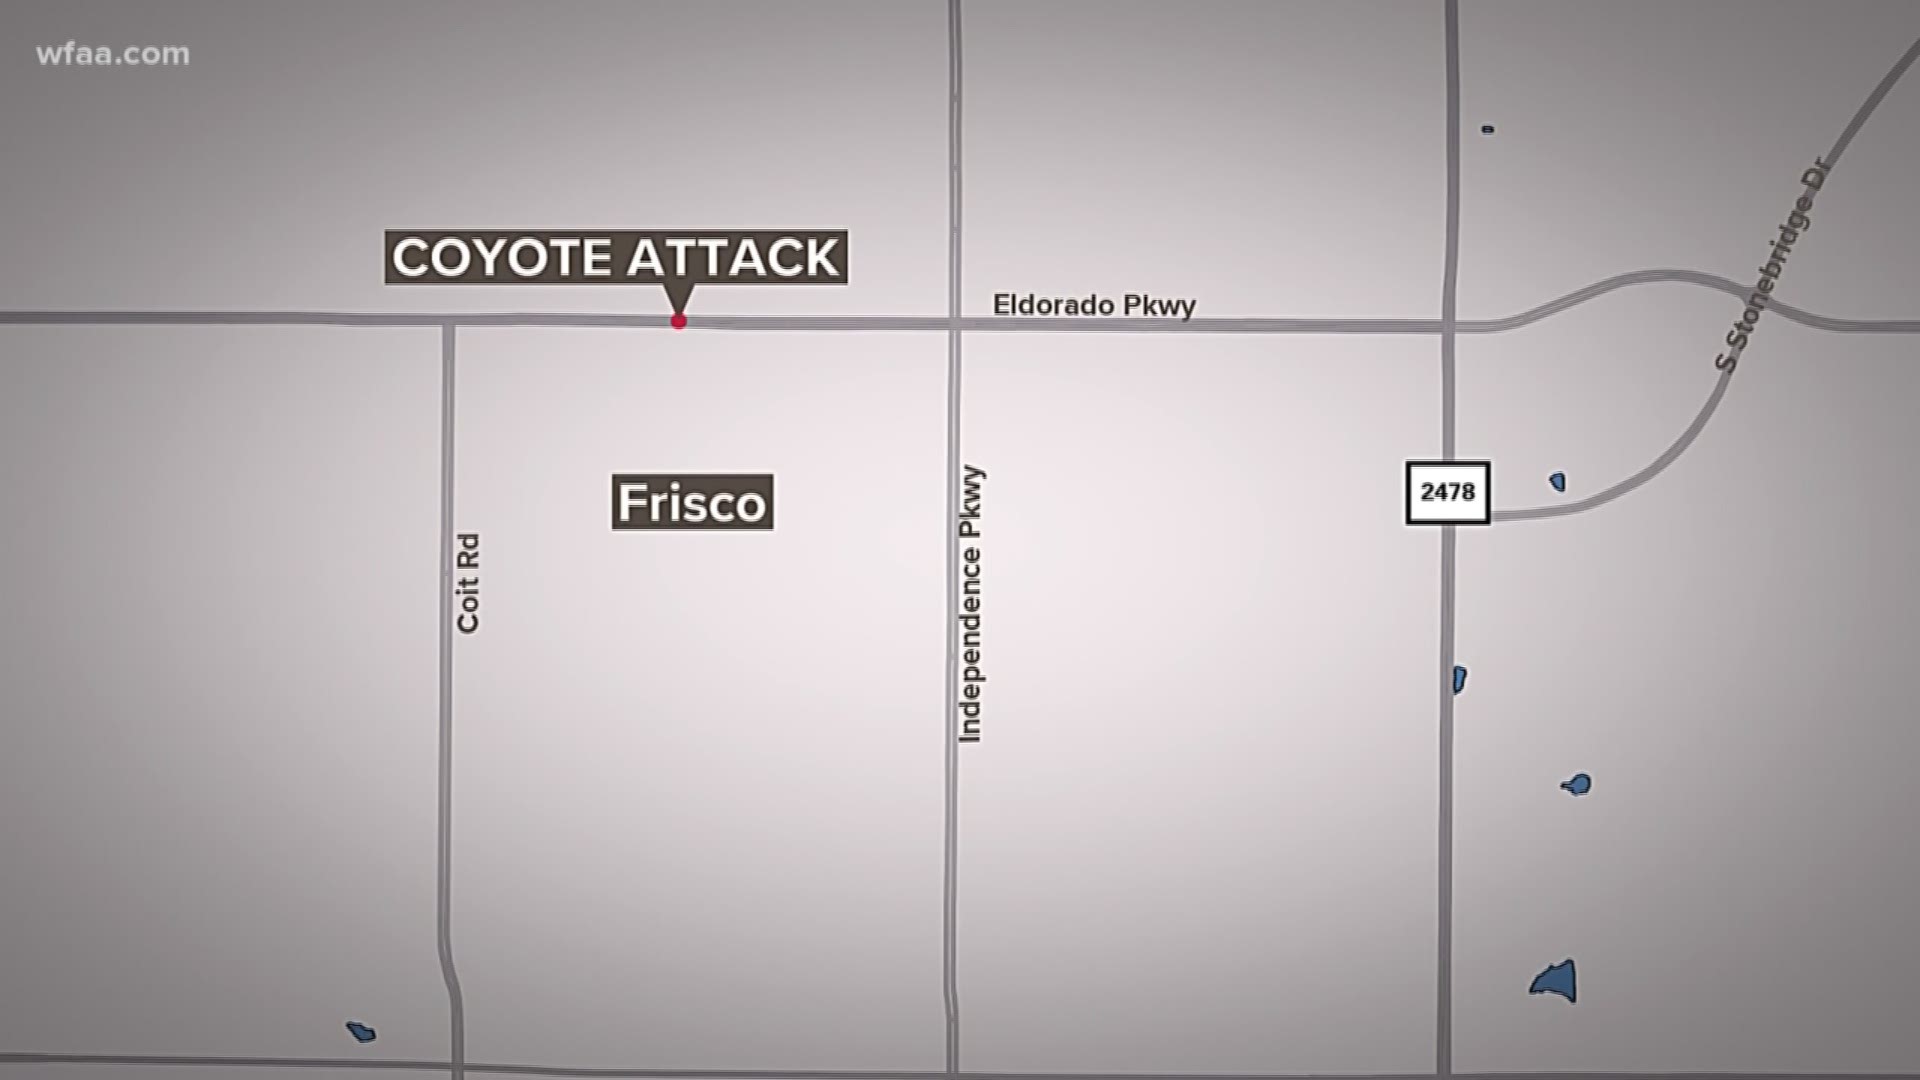 At least seven sightings or attacks have been reported in the Frisco area along Eldorado Parkway since October.